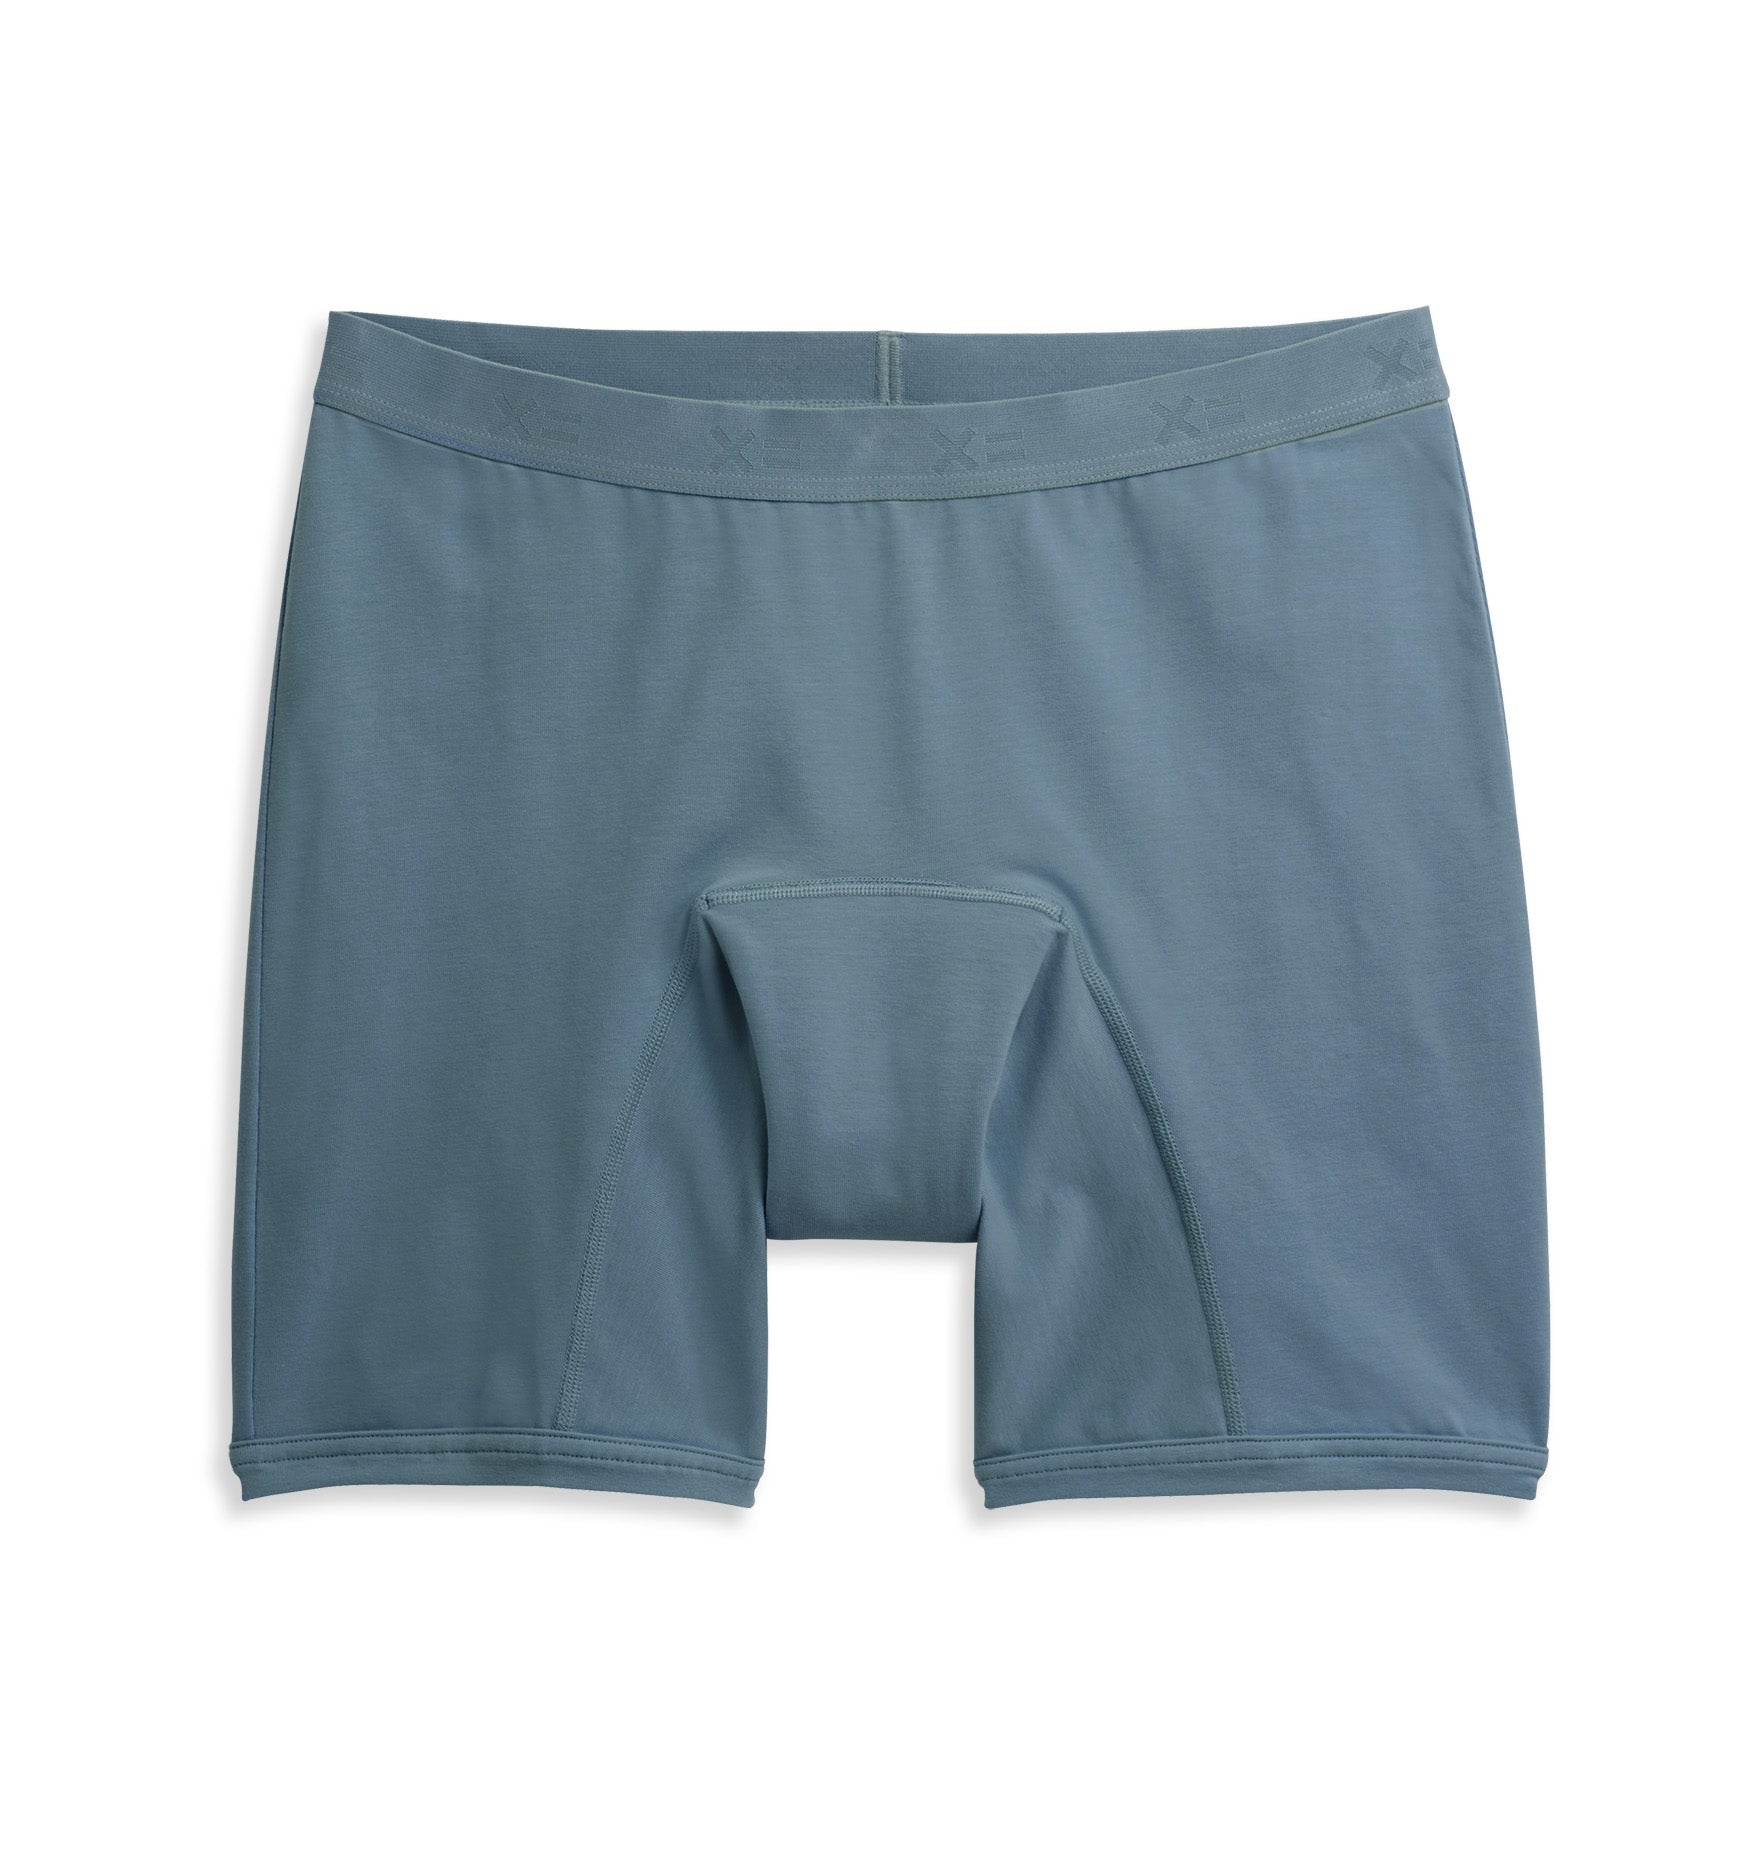 NORDSTROM TomboyX Gender Inclusive 9-Inch Boxer Briefs in Chai at  Nordstrom, Size 6 X Cash Back 5.25%. Share to Earn